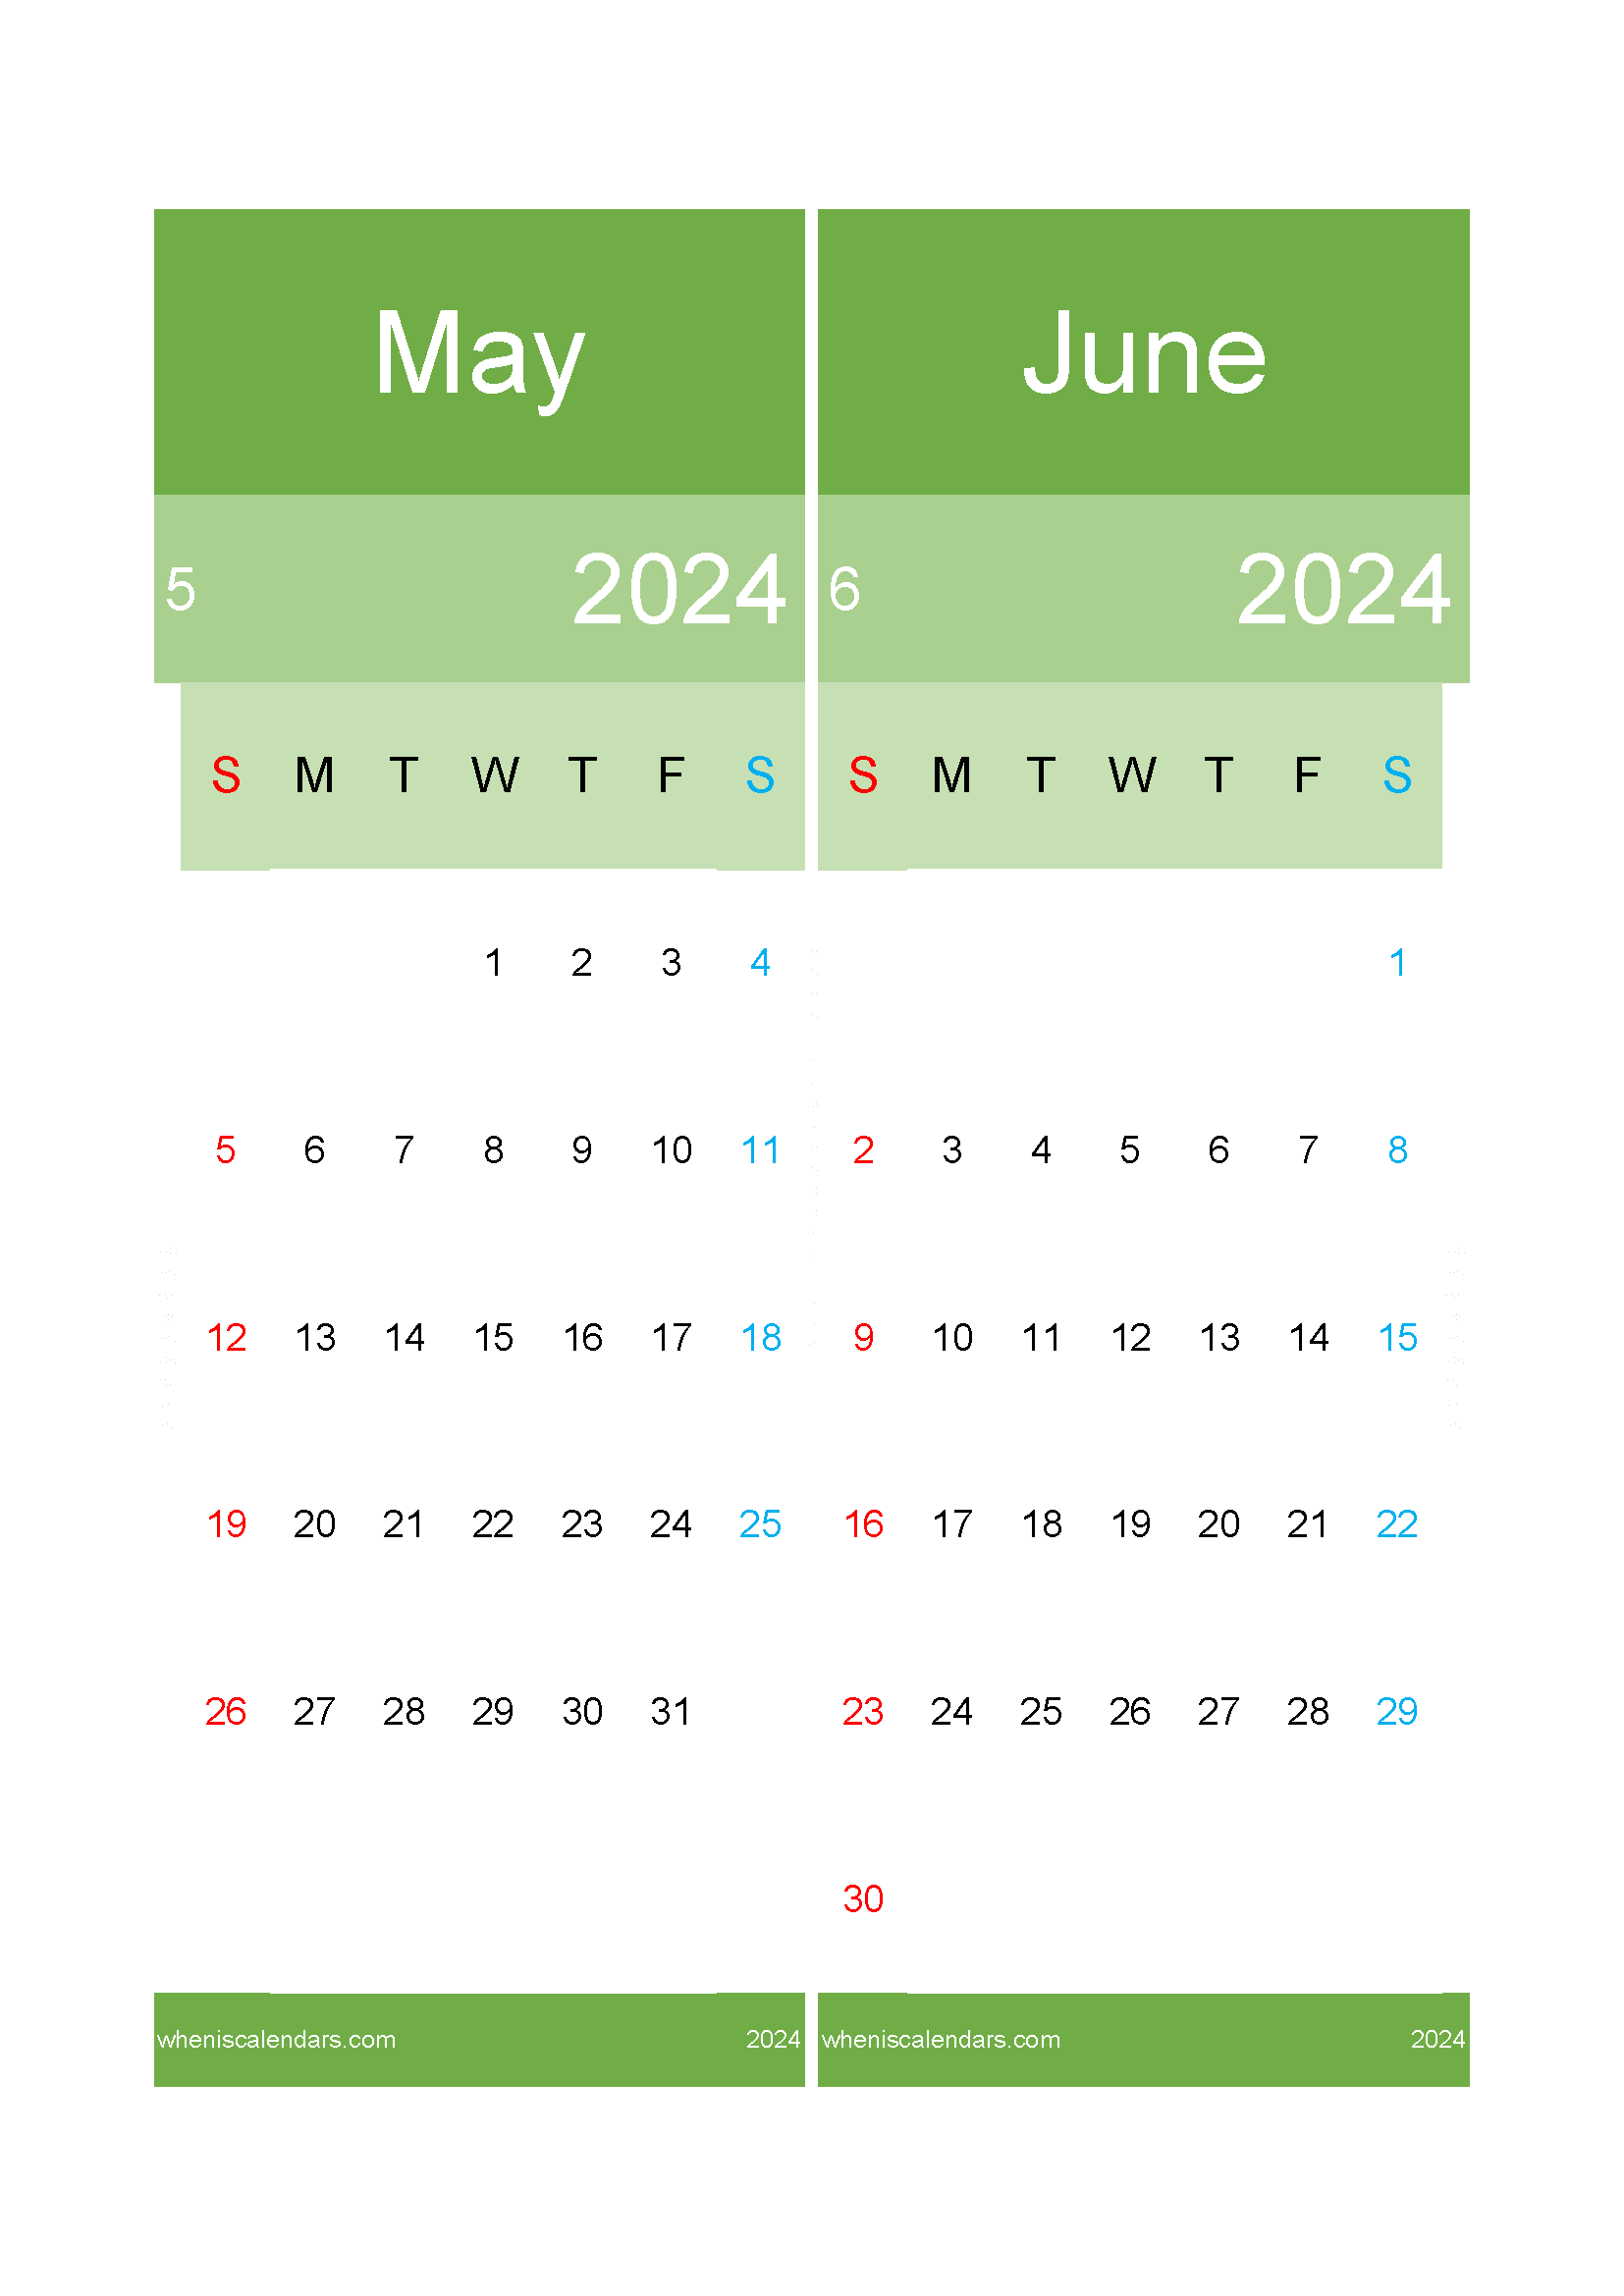 Download Calendar For May And June 2024 A4 MJ430